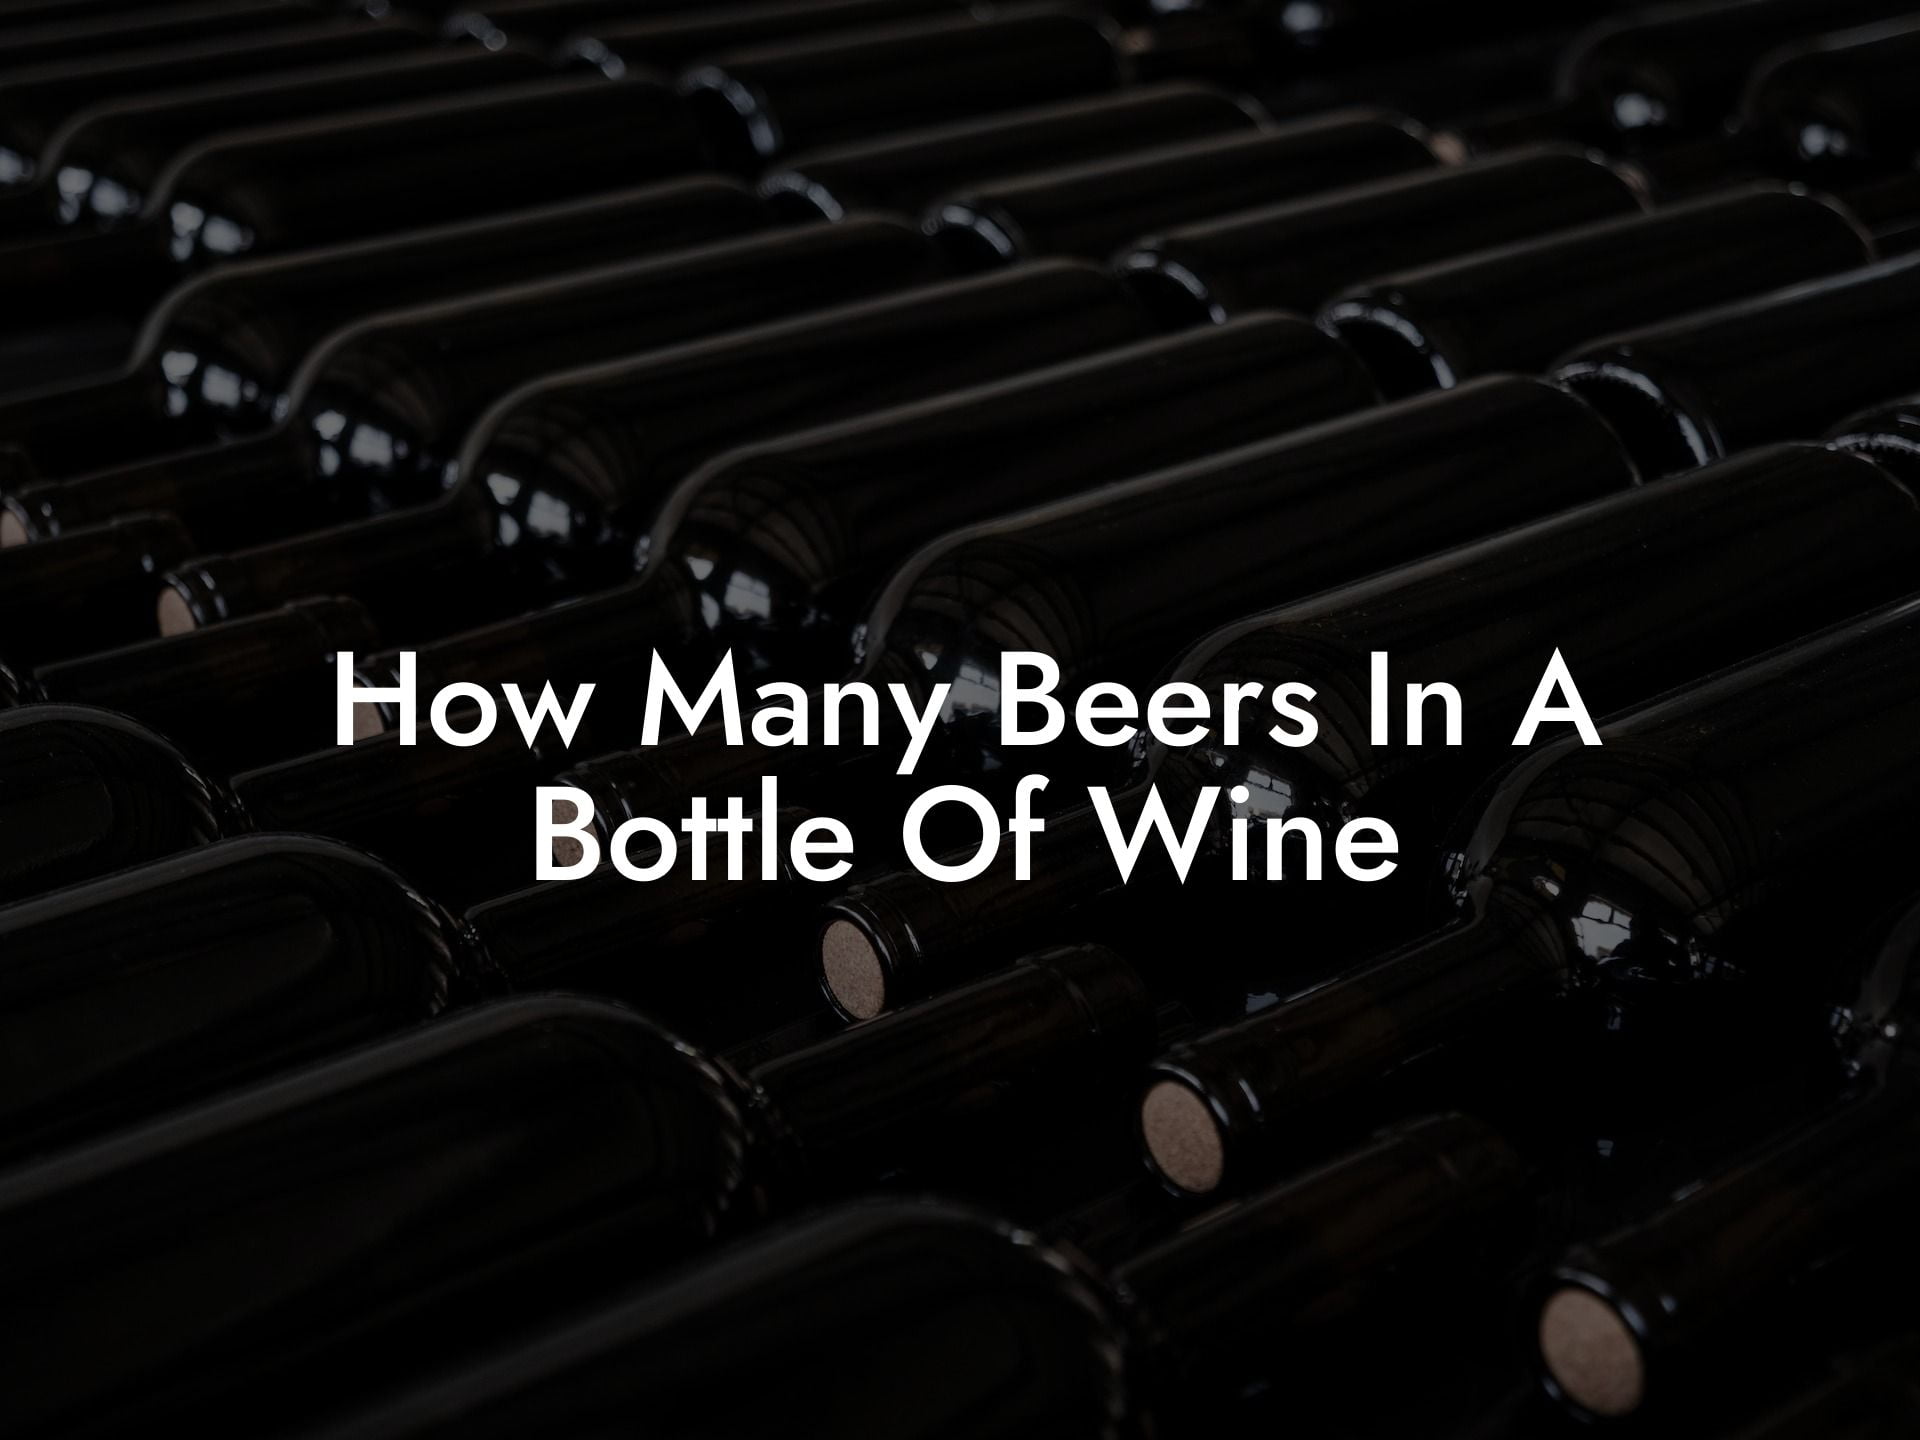 How Many Beers In A Bottle Of Wine